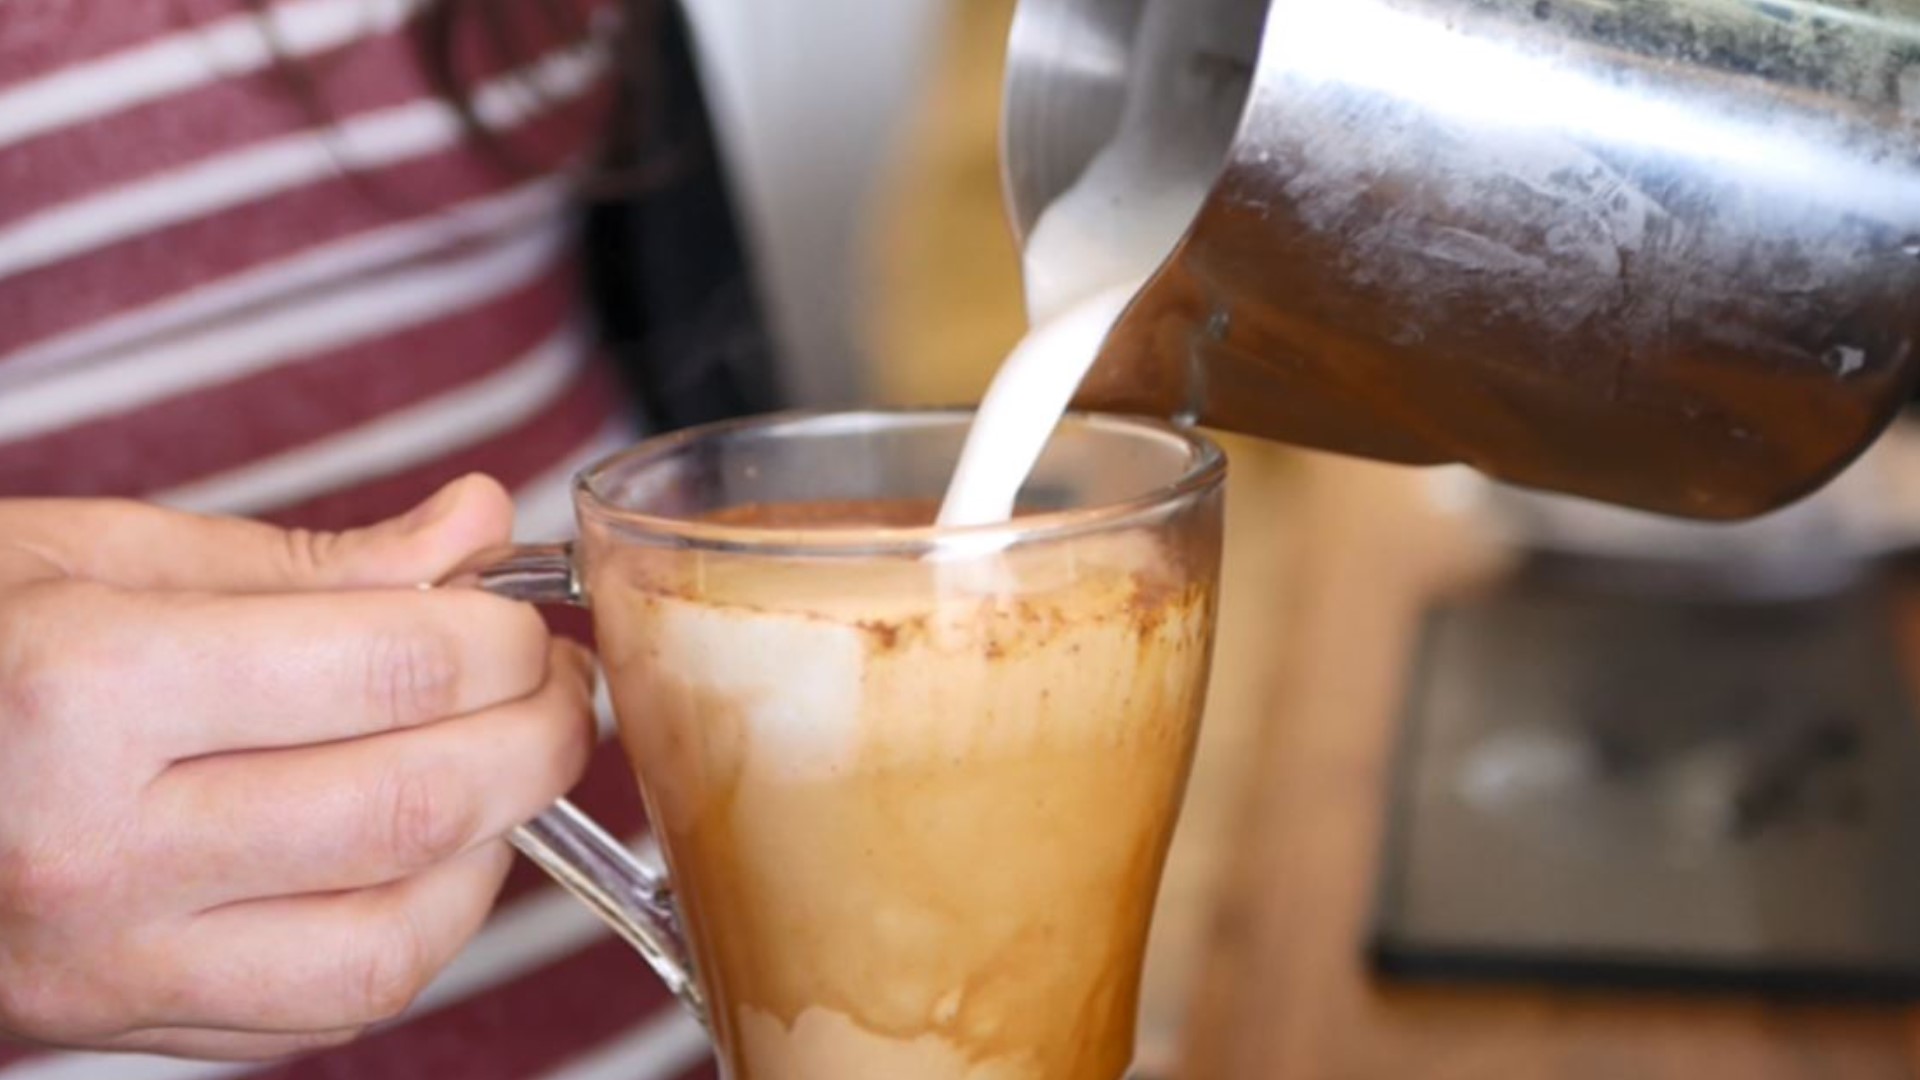 Several coffee shops are offering free or cheap coffee in honor of National Coffee Day on Wednesday.